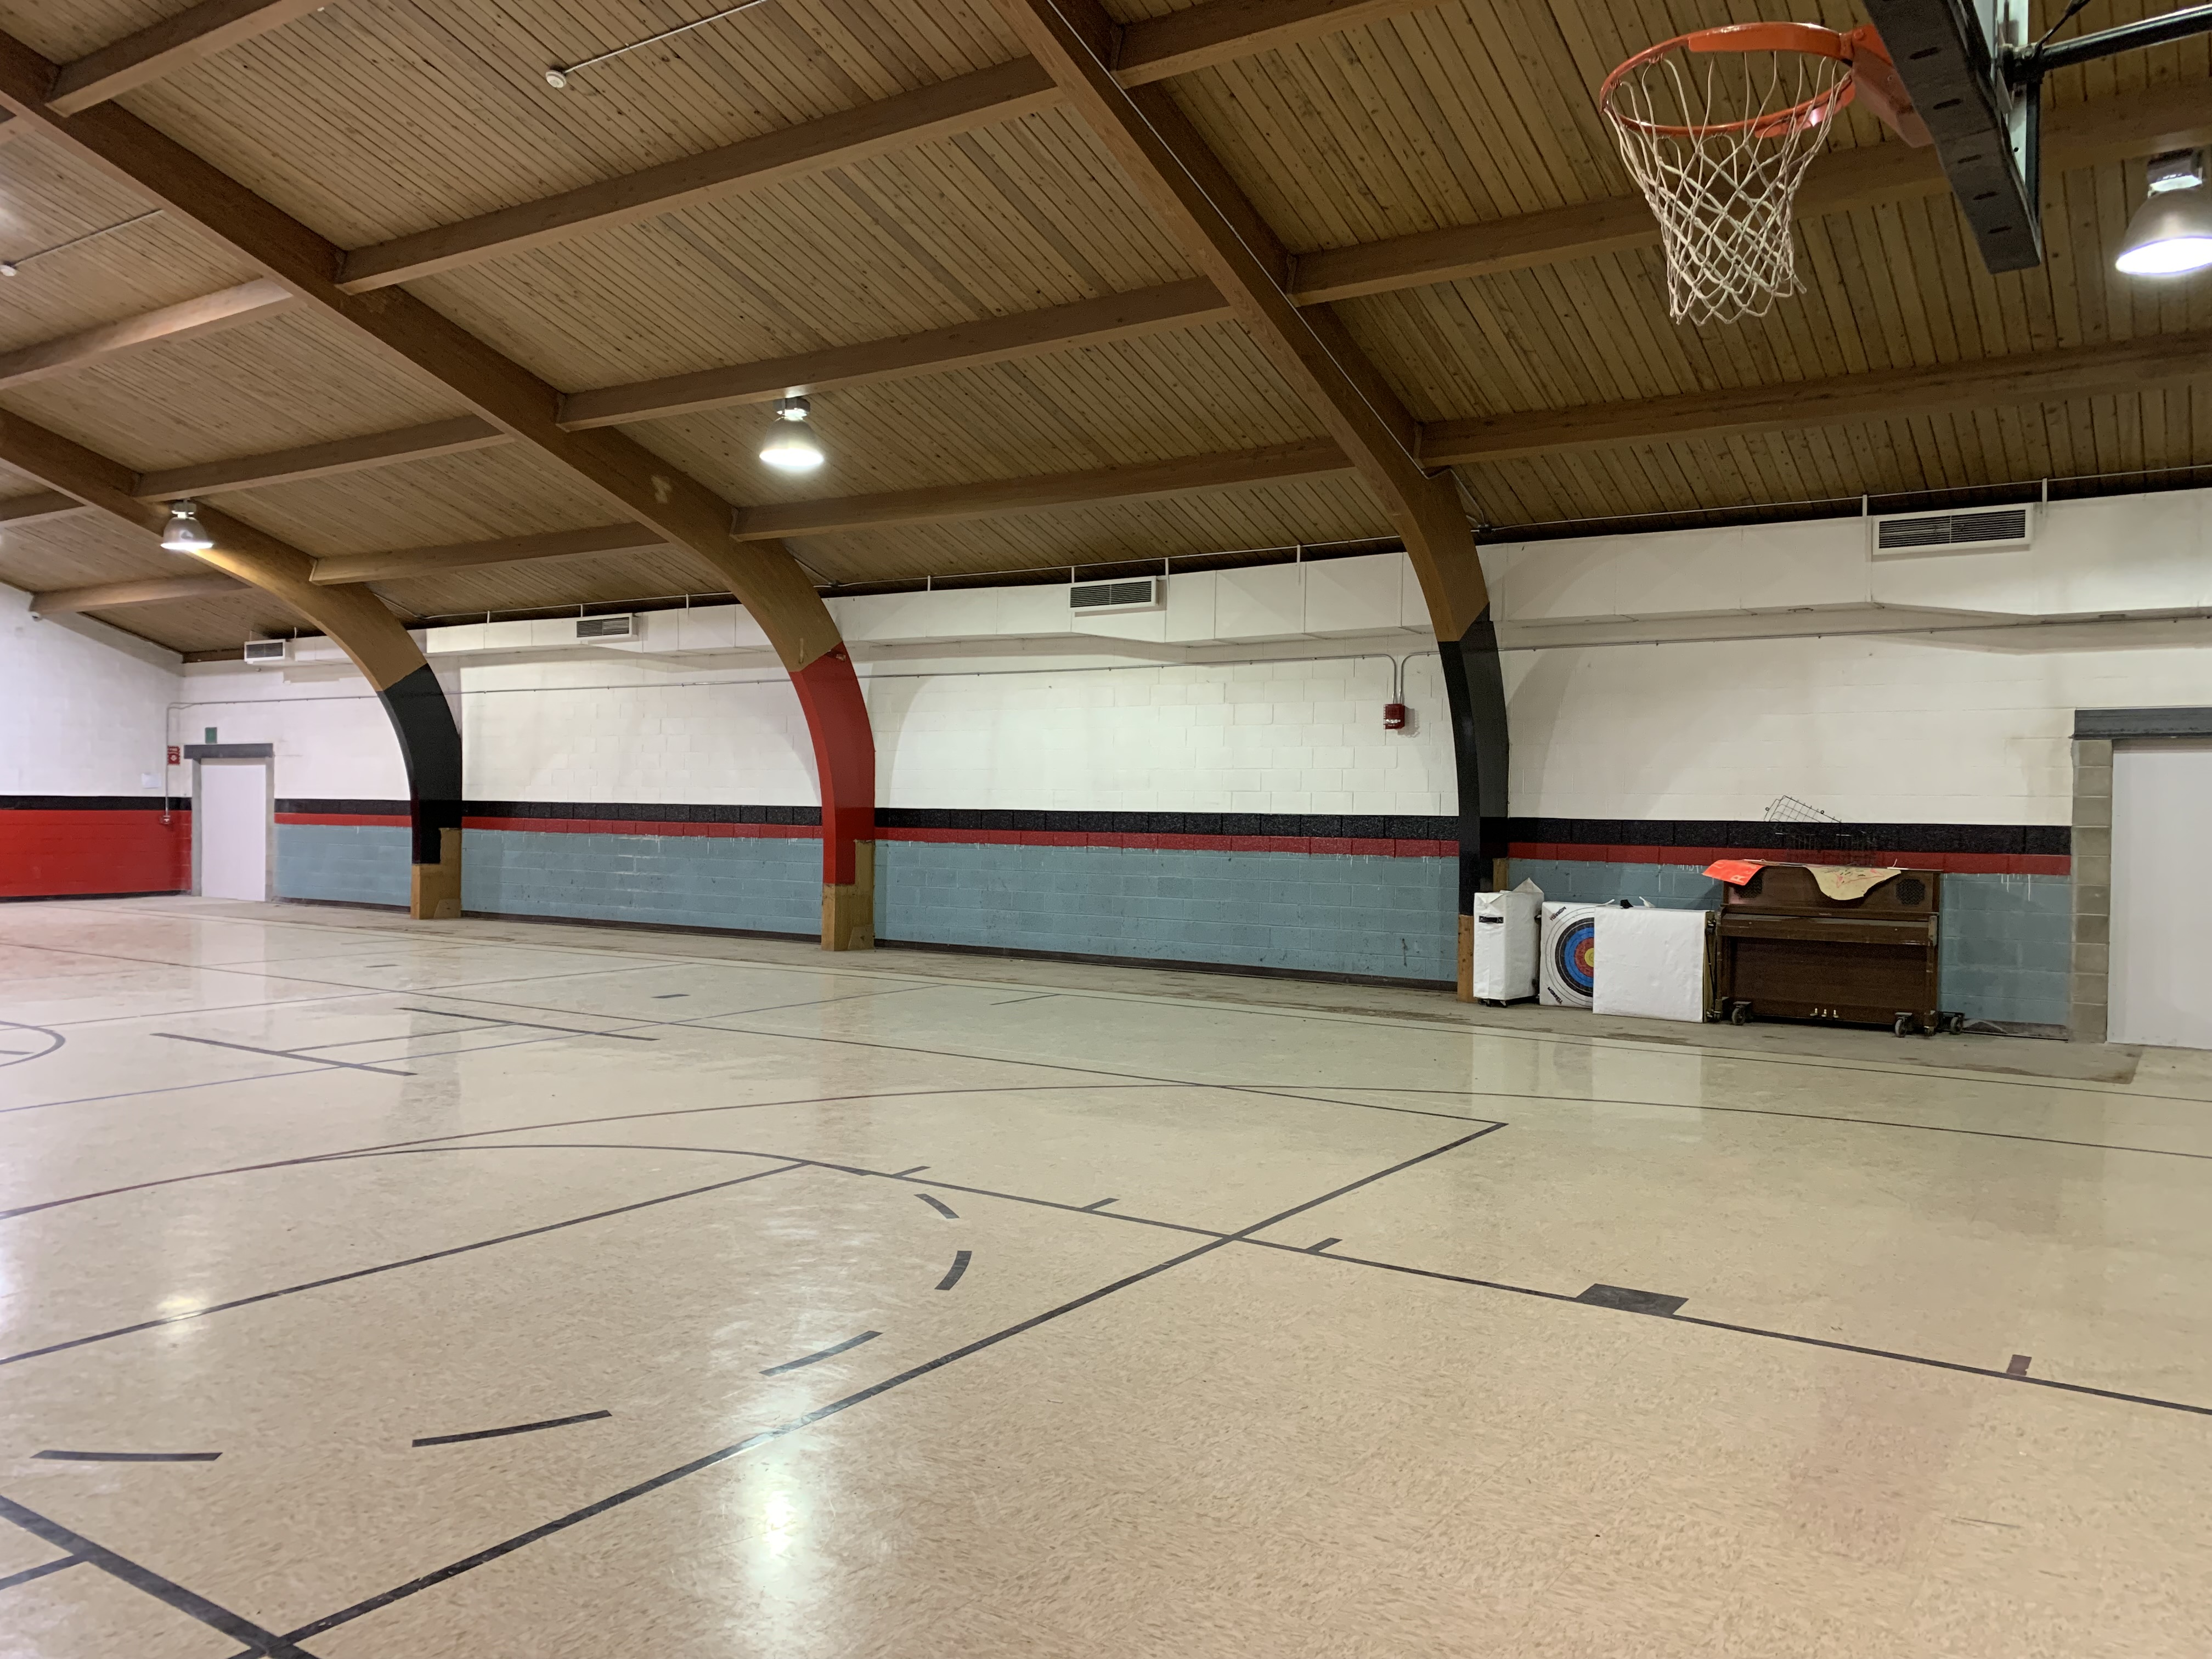 Image of the progress of the gym renovation